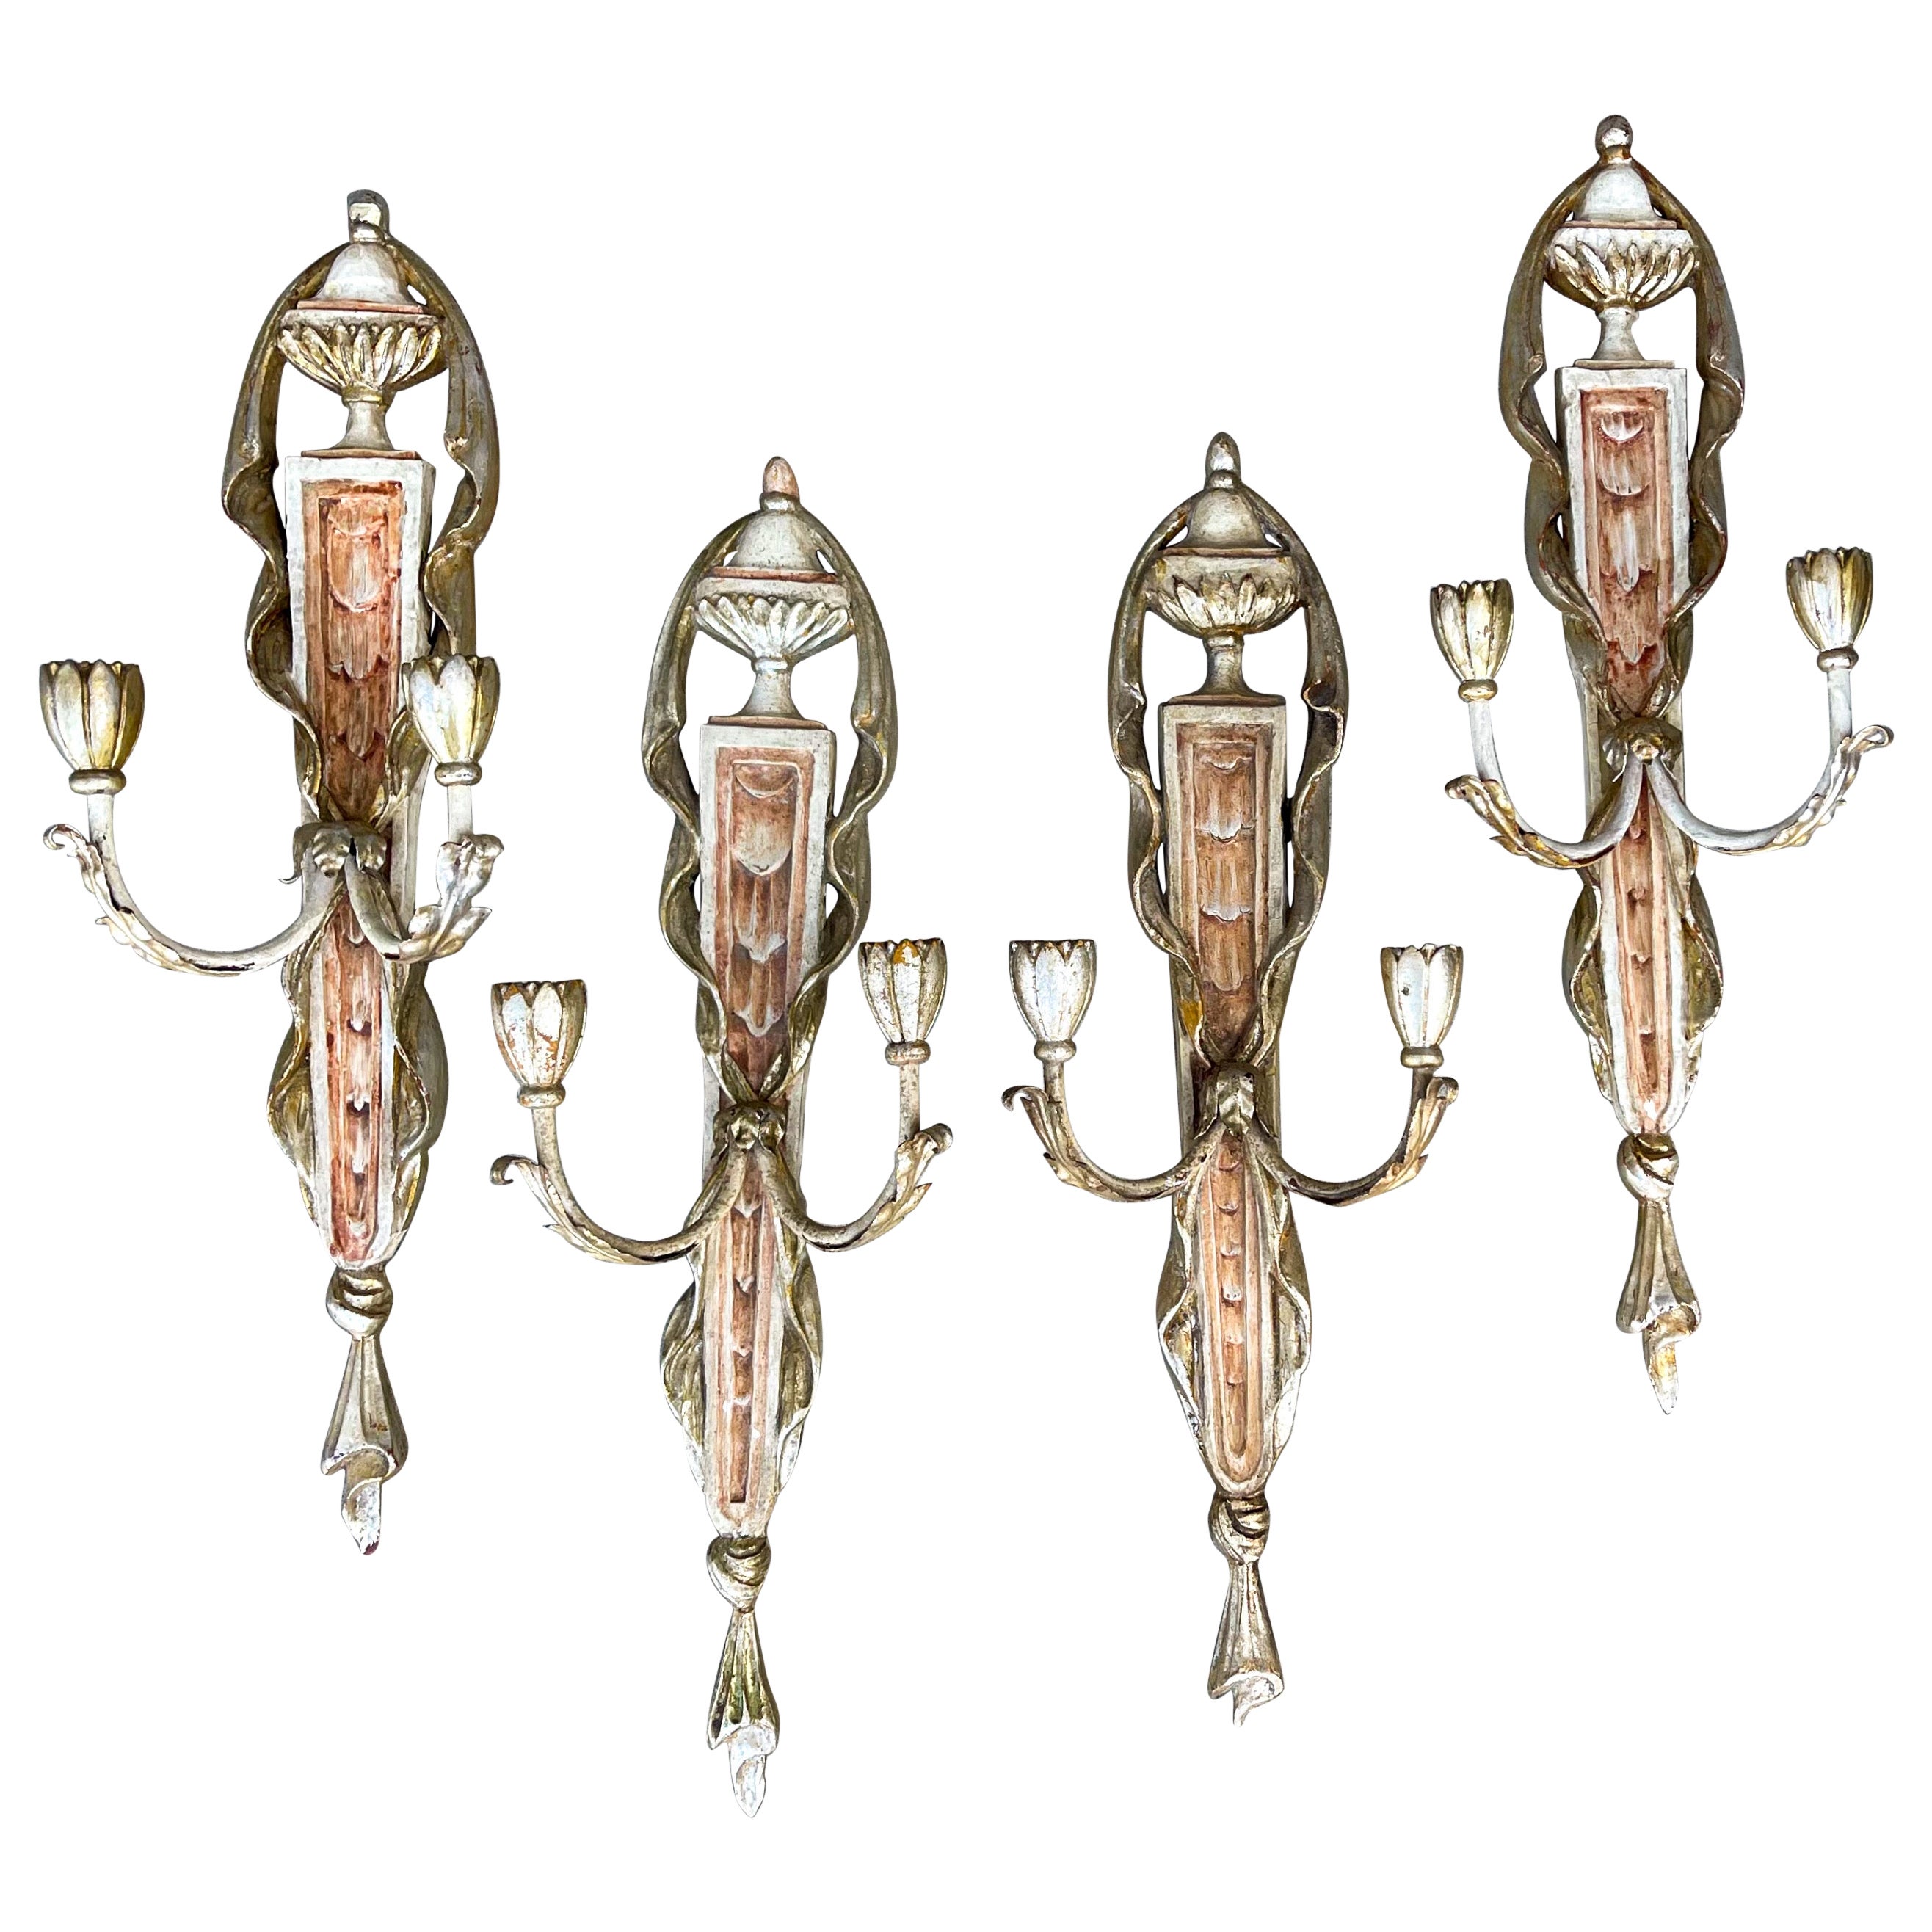 Italian Neo-Classical Style Painted Silver Gilt Tole Trompe-L’Oeil Sconces, S/4